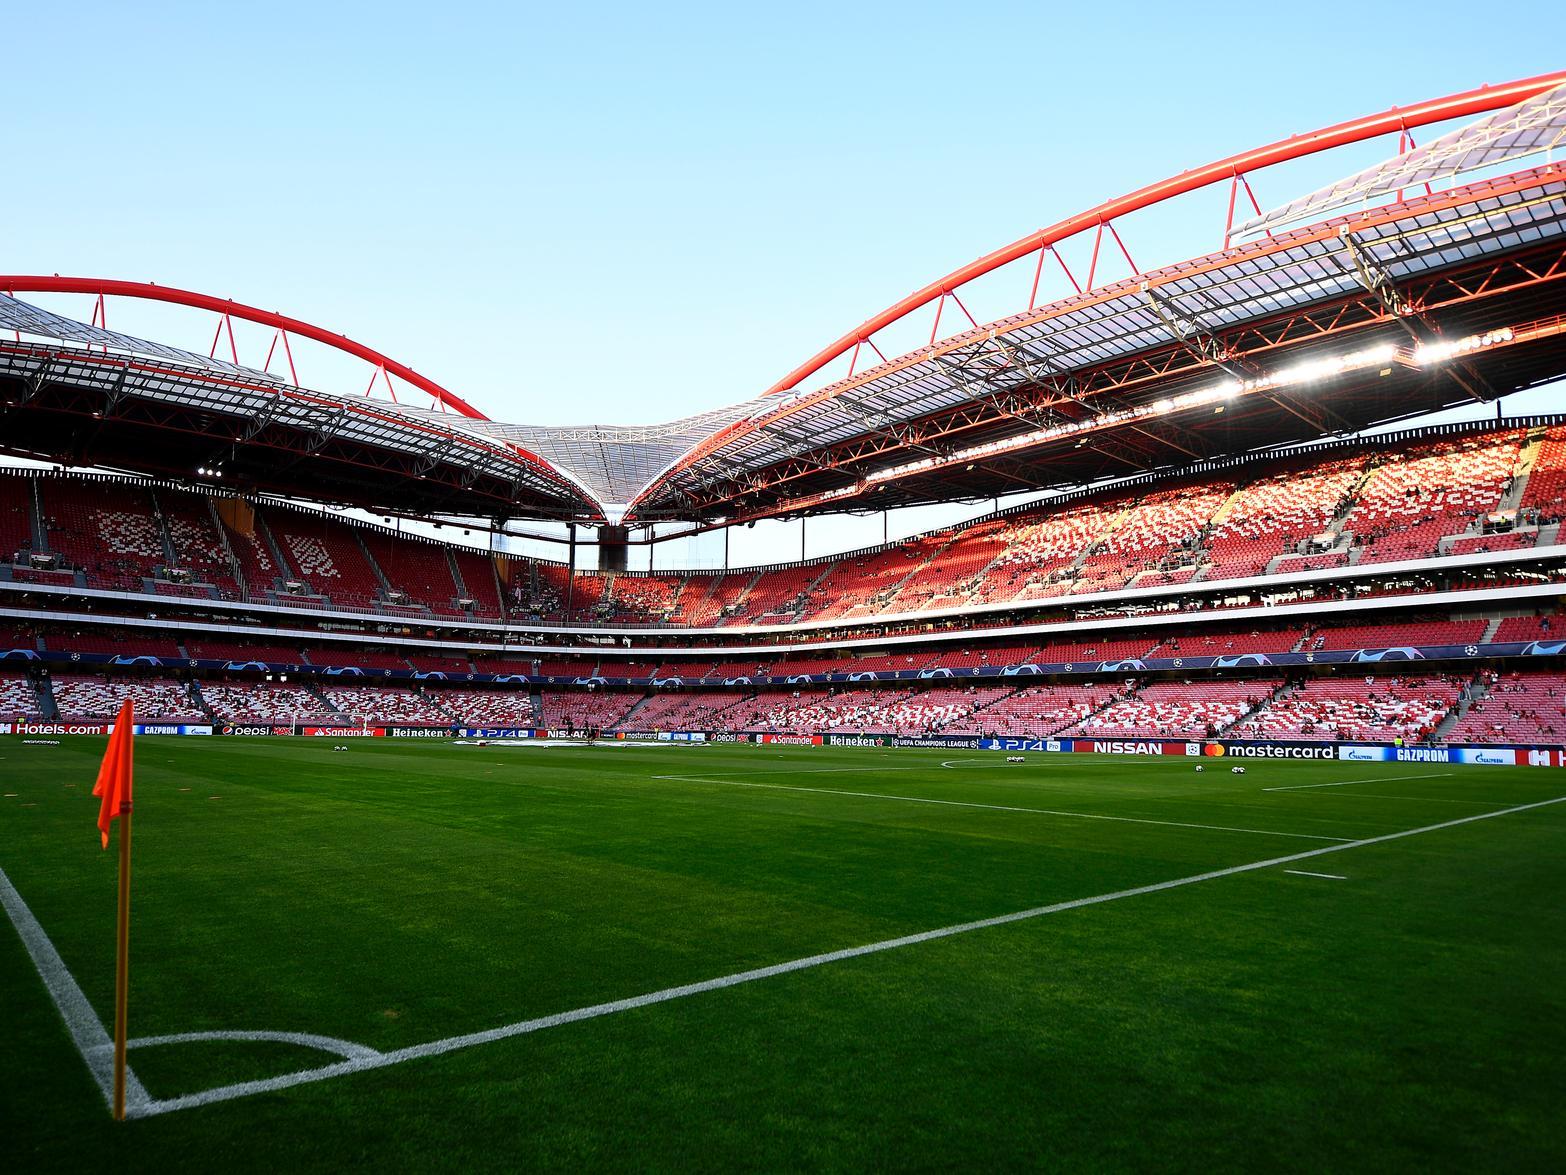 Scouts from Leeds United are said to have taken in another key fixture in Portugal, with reports claiming the Whites' recruitment team watched Benfica in action on Monday night. (A Bola)